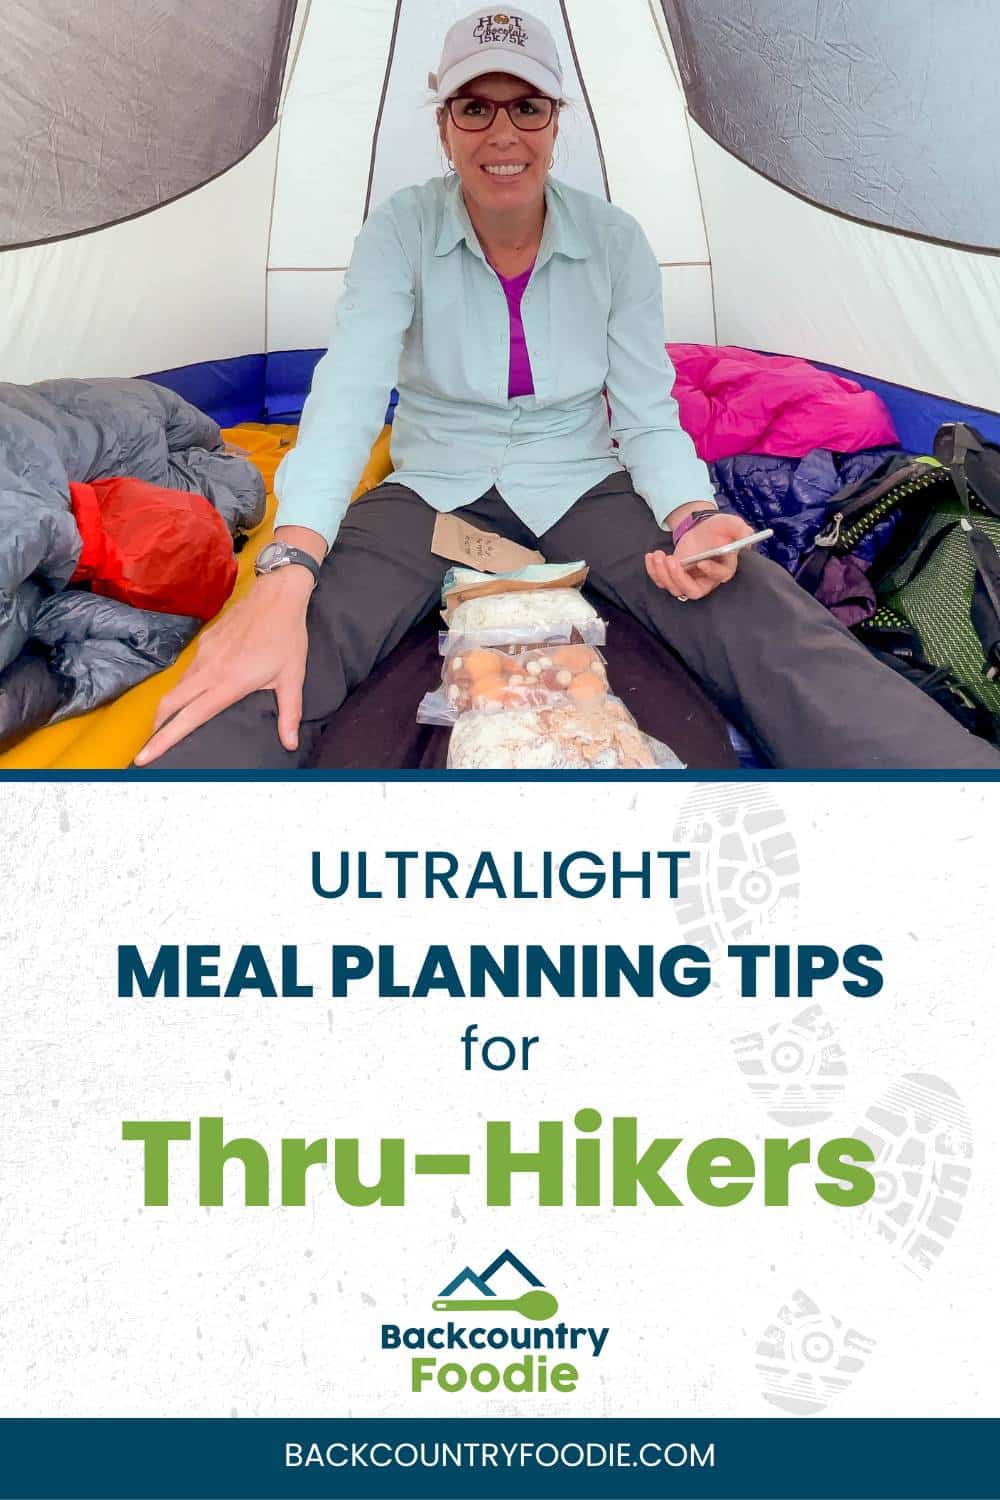 Backcountry Foodie Ultralight Backpacking Meal Planning Tips for Thru Hikers with Aaron Owens Mayhew backpacking dietitian